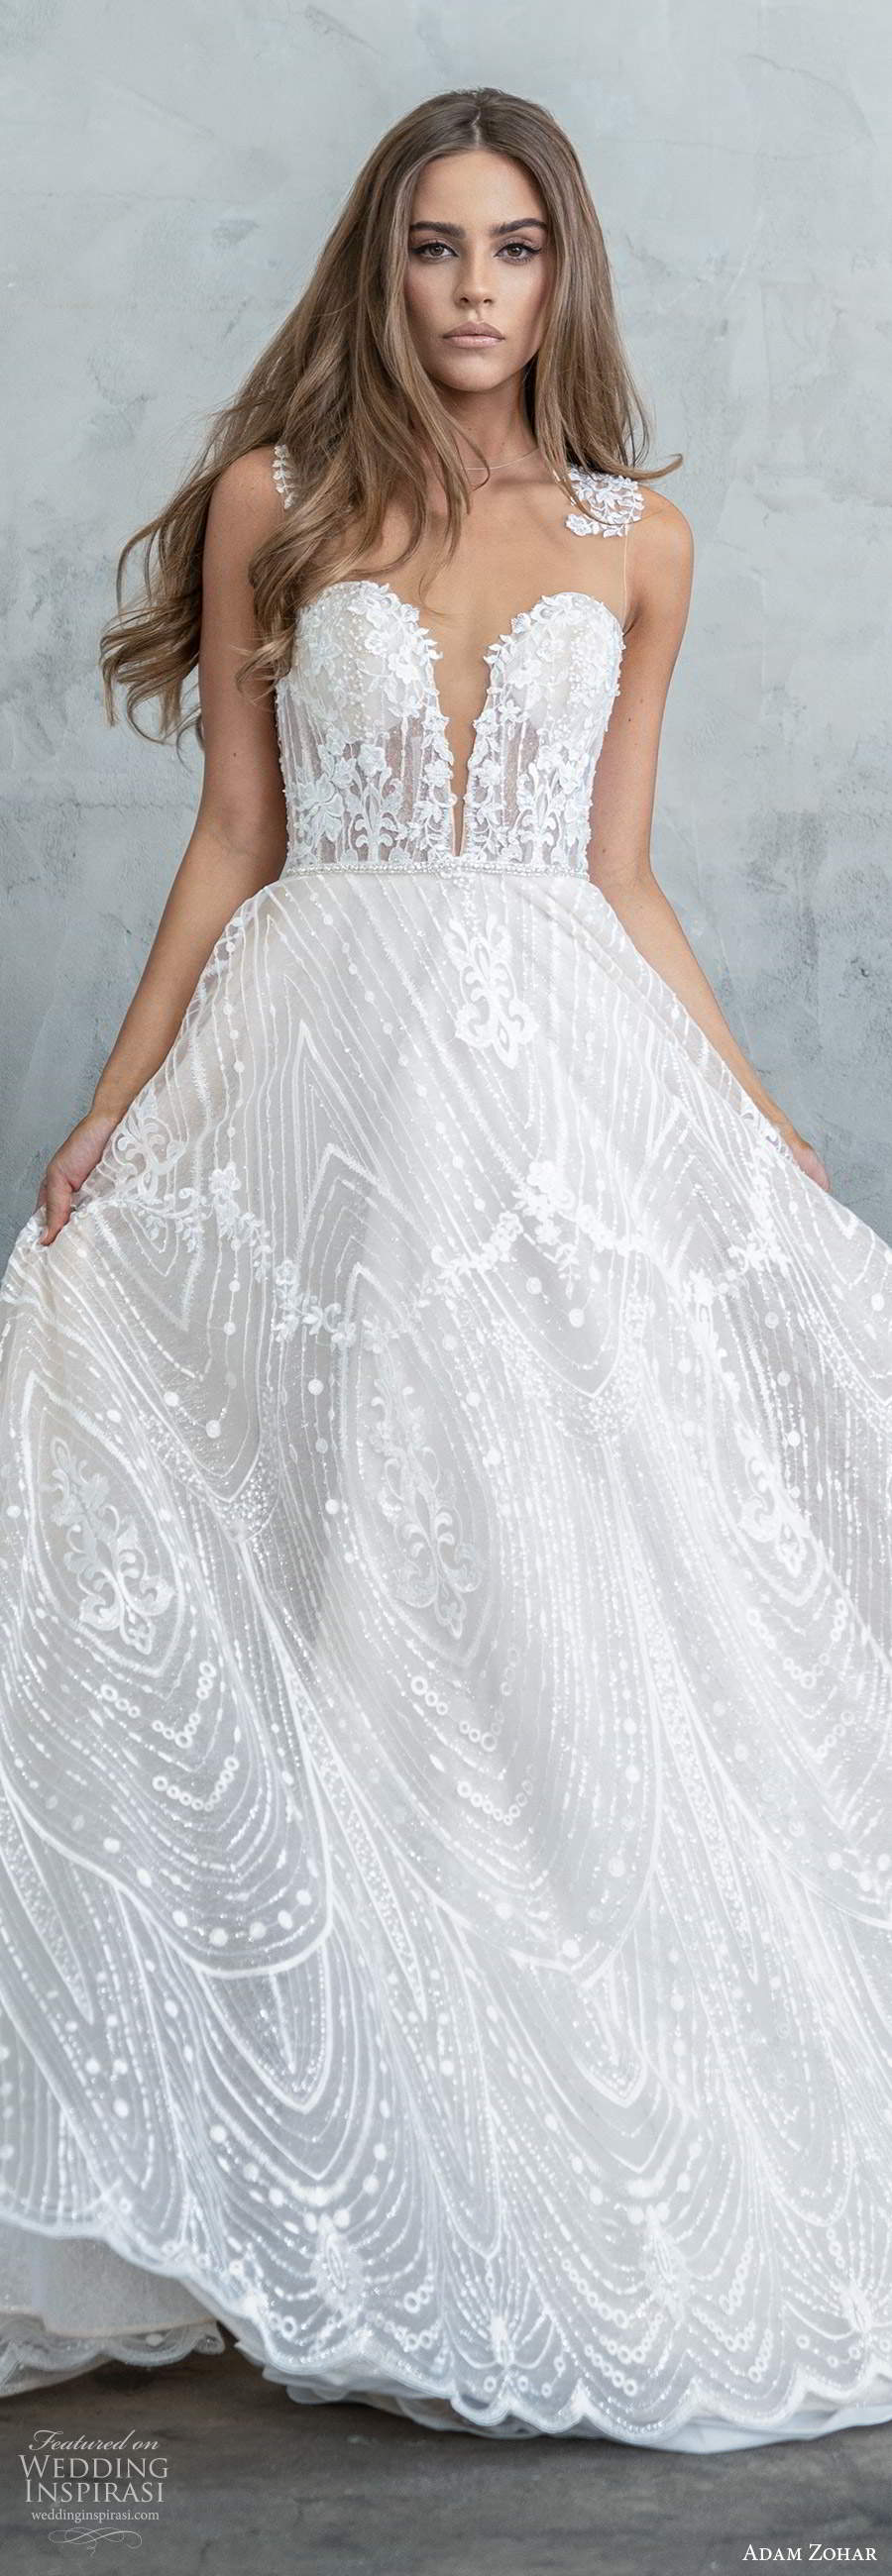 adam zohar fall 2020 bridal sleeveless illusion jewel neck plunging sweetheart neckline fully embellished lace a line ball gown wedding dress sheer back chapel train (5) lv